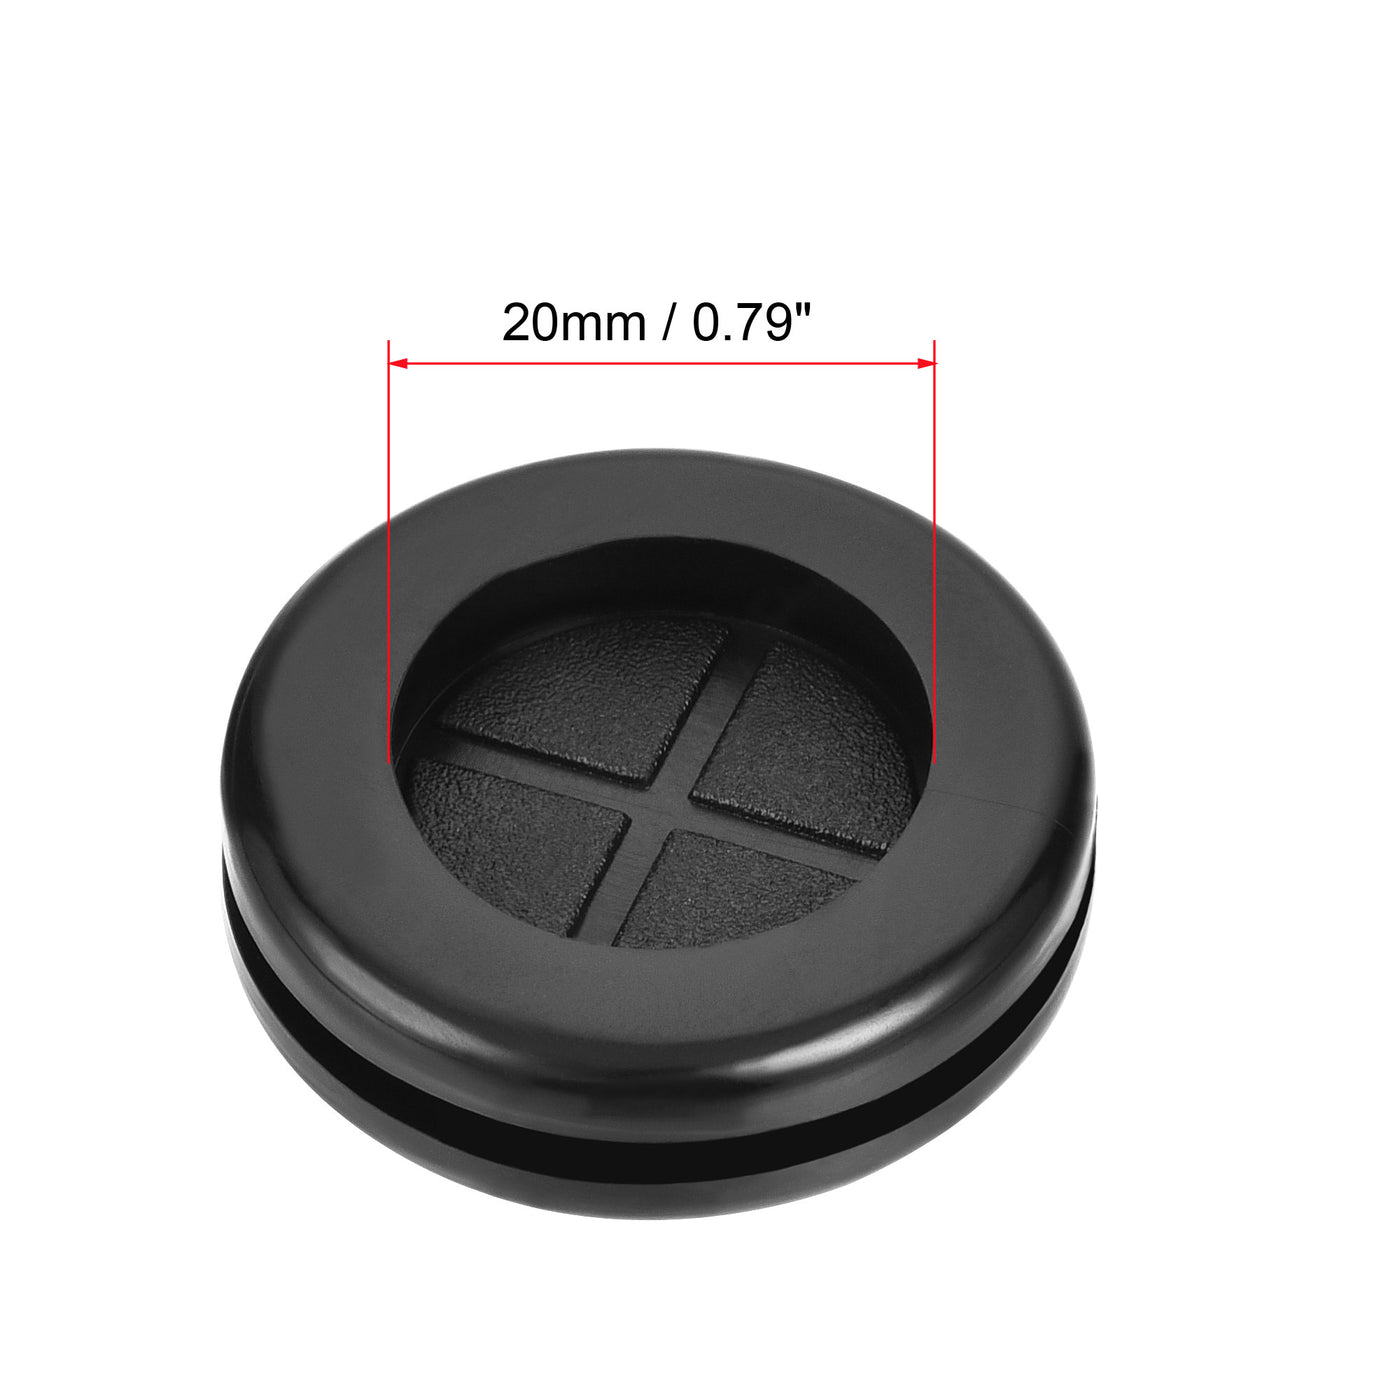 Uxcell Uxcell Rubber Grommet Round Double-Sided Mount Dia 35 mm for Wire Protection 20pcs